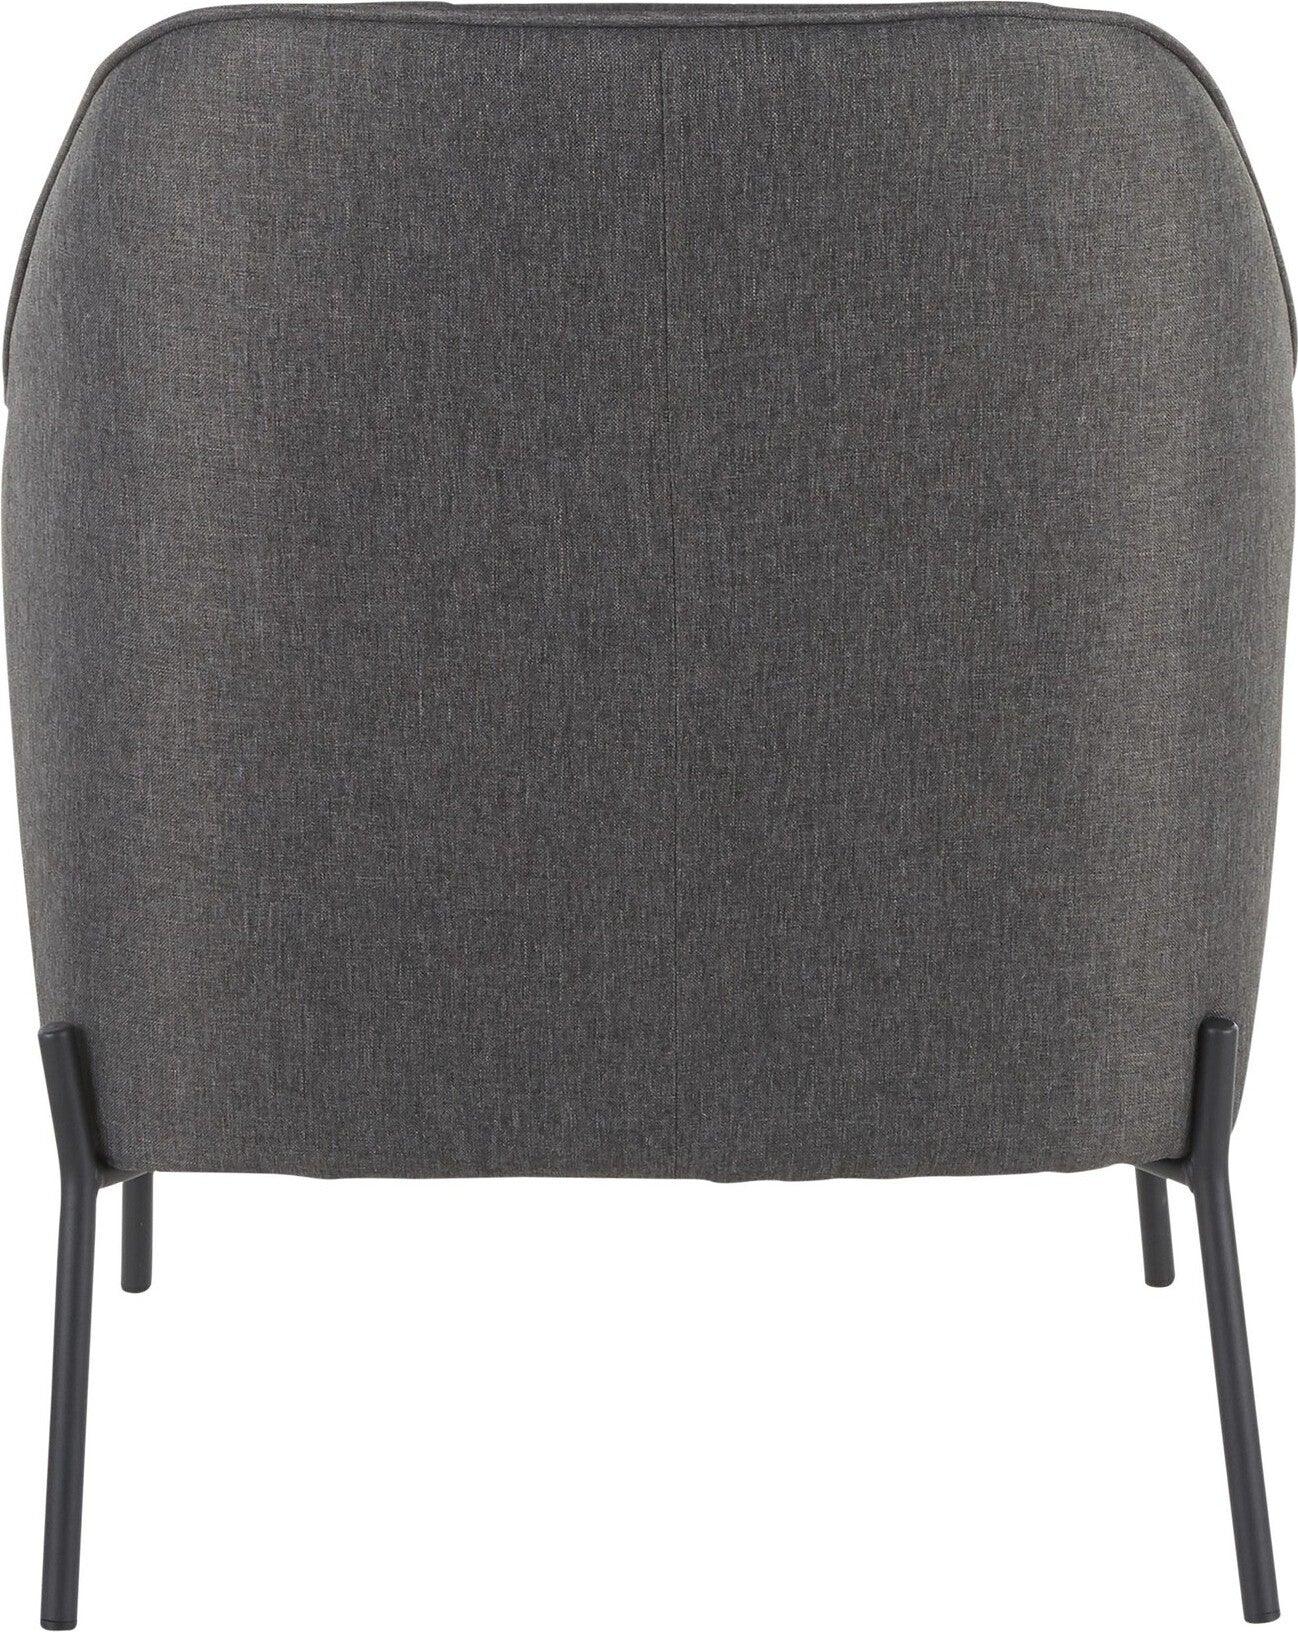 Lumisource Accent Chairs - Daniella Accent Chair Black & Charcoal